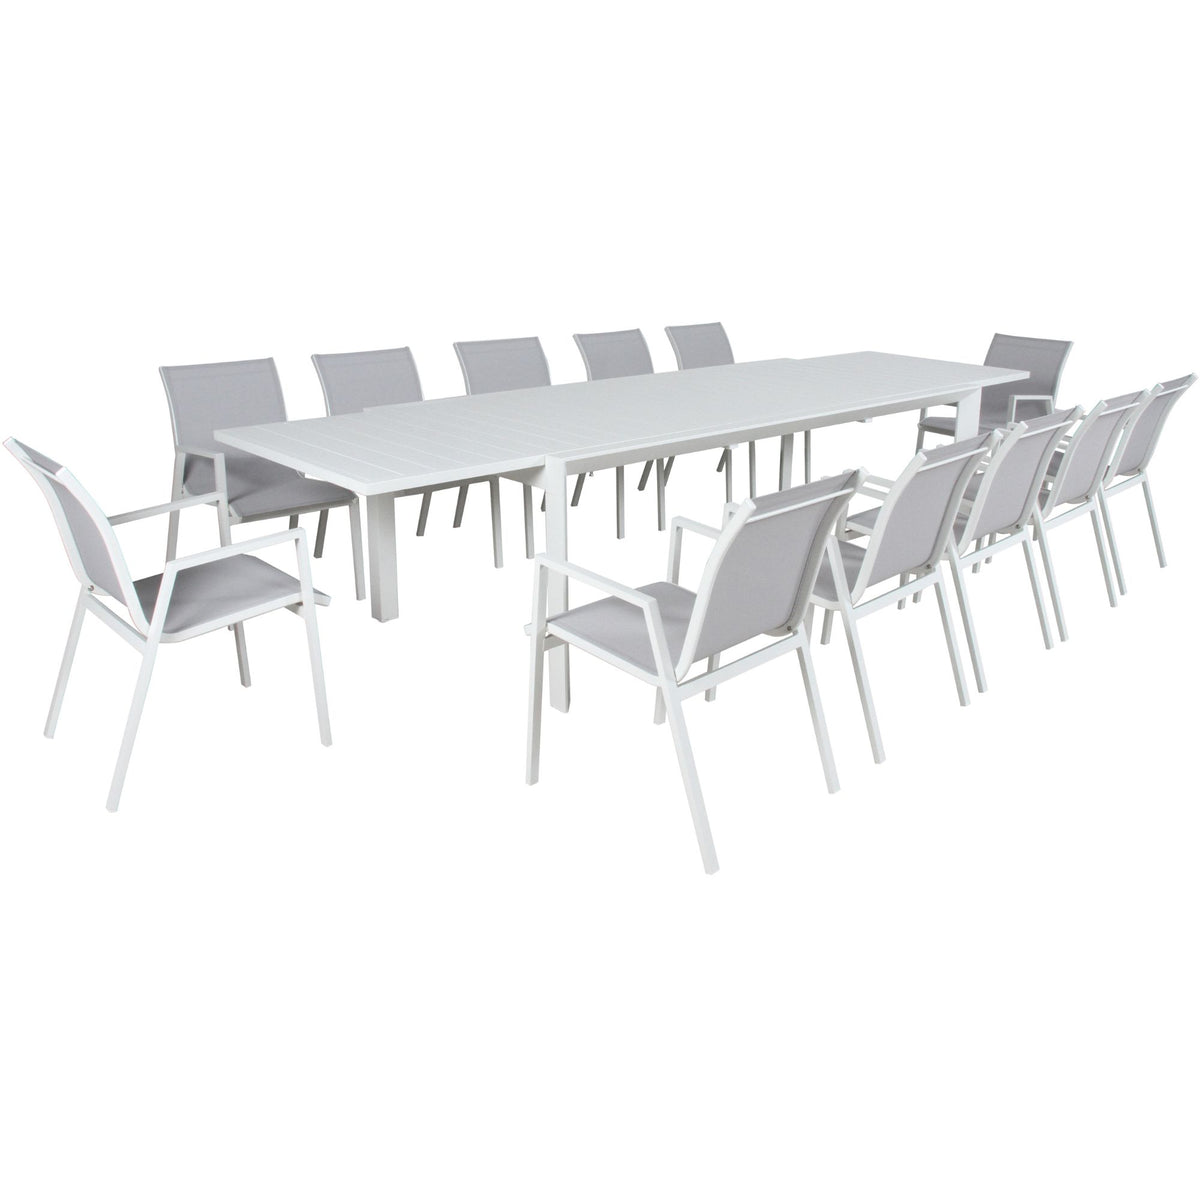 Iberia 13pc Outdoor Extensible Dining Table Chair Set White 